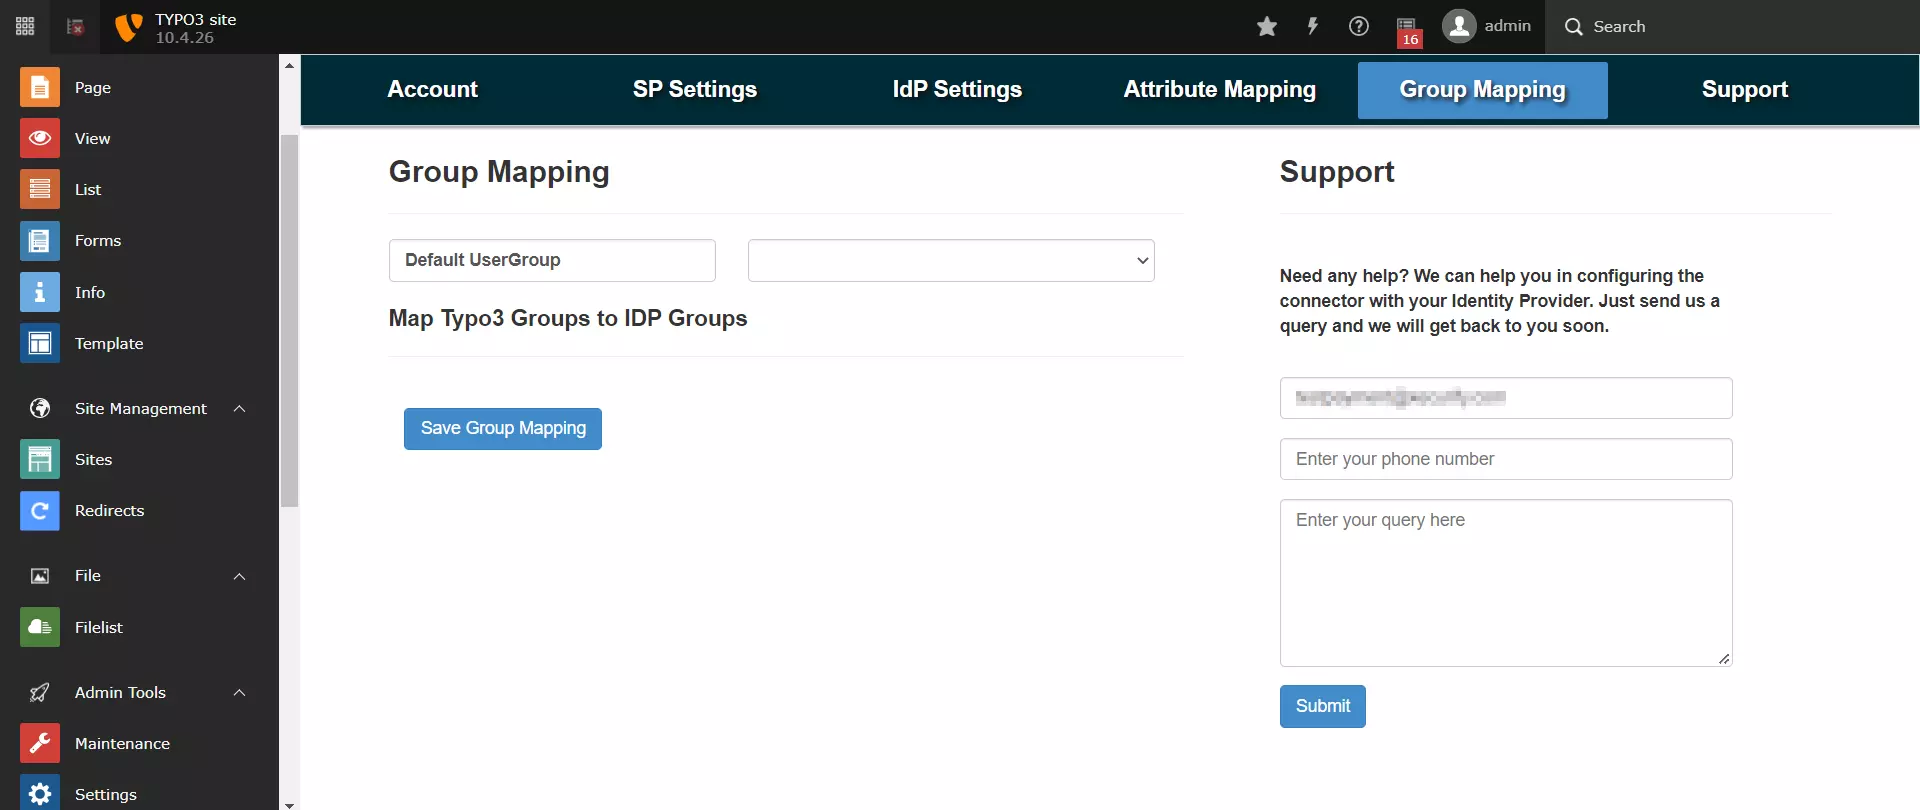 Typo3 SAML SSO Single Sign-On(SSO) Login in Typo3 - Group mapping